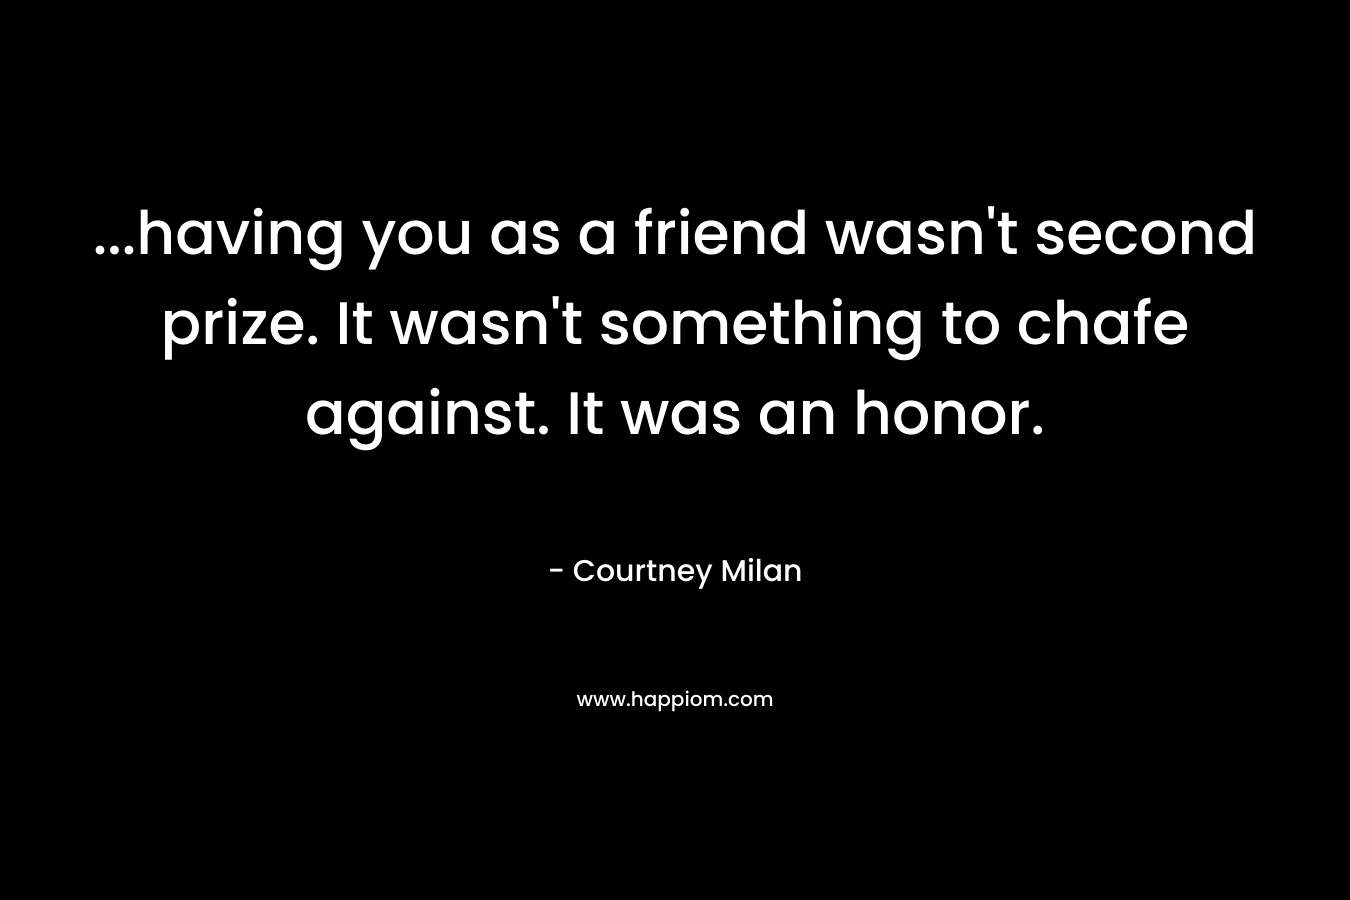 …having you as a friend wasn’t second prize. It wasn’t something to chafe against. It was an honor. – Courtney Milan